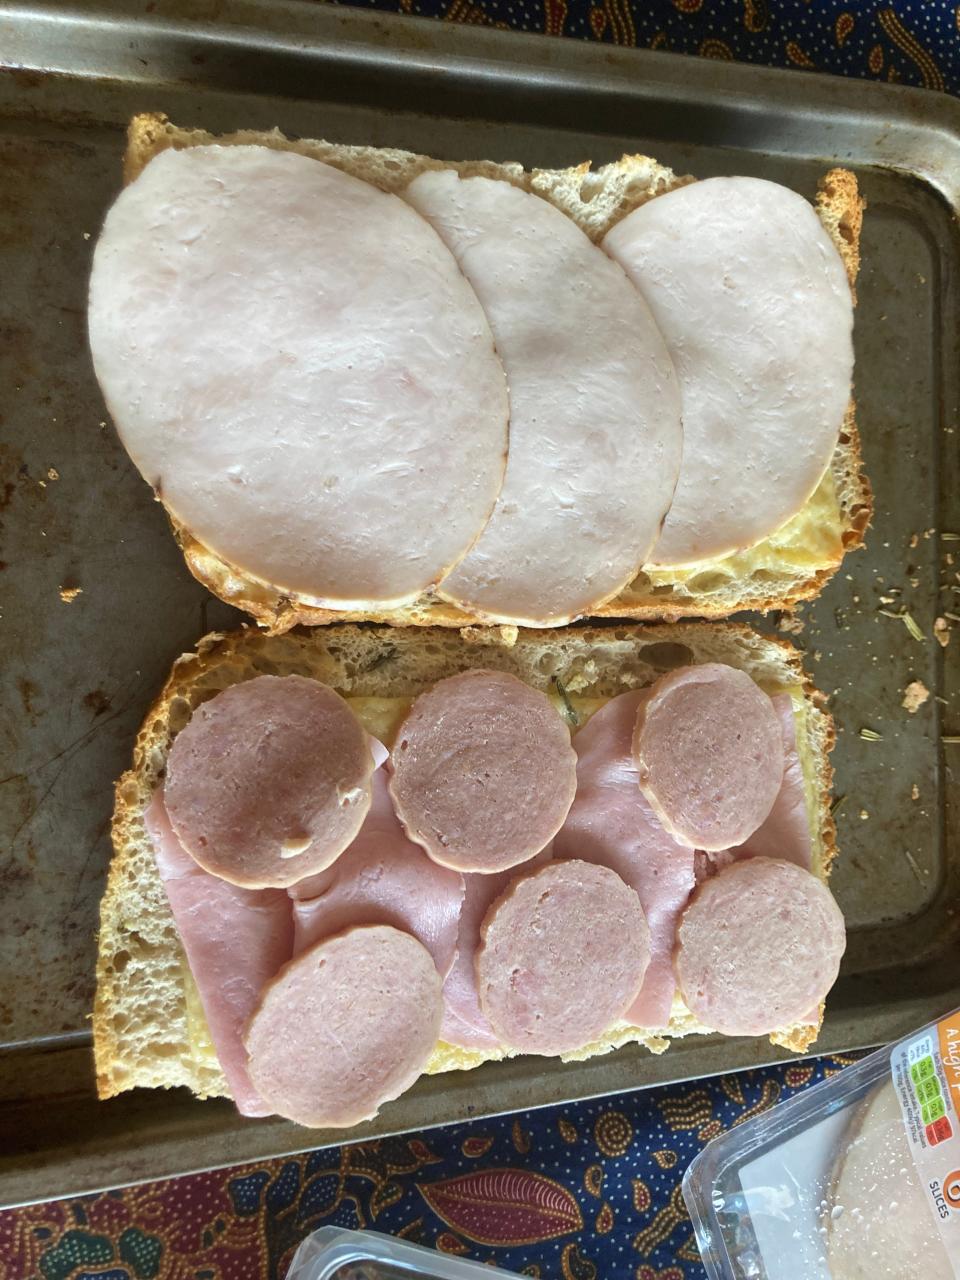 A picture of the focaccia with turkey on one side, and pork slices and thin ham on the other.